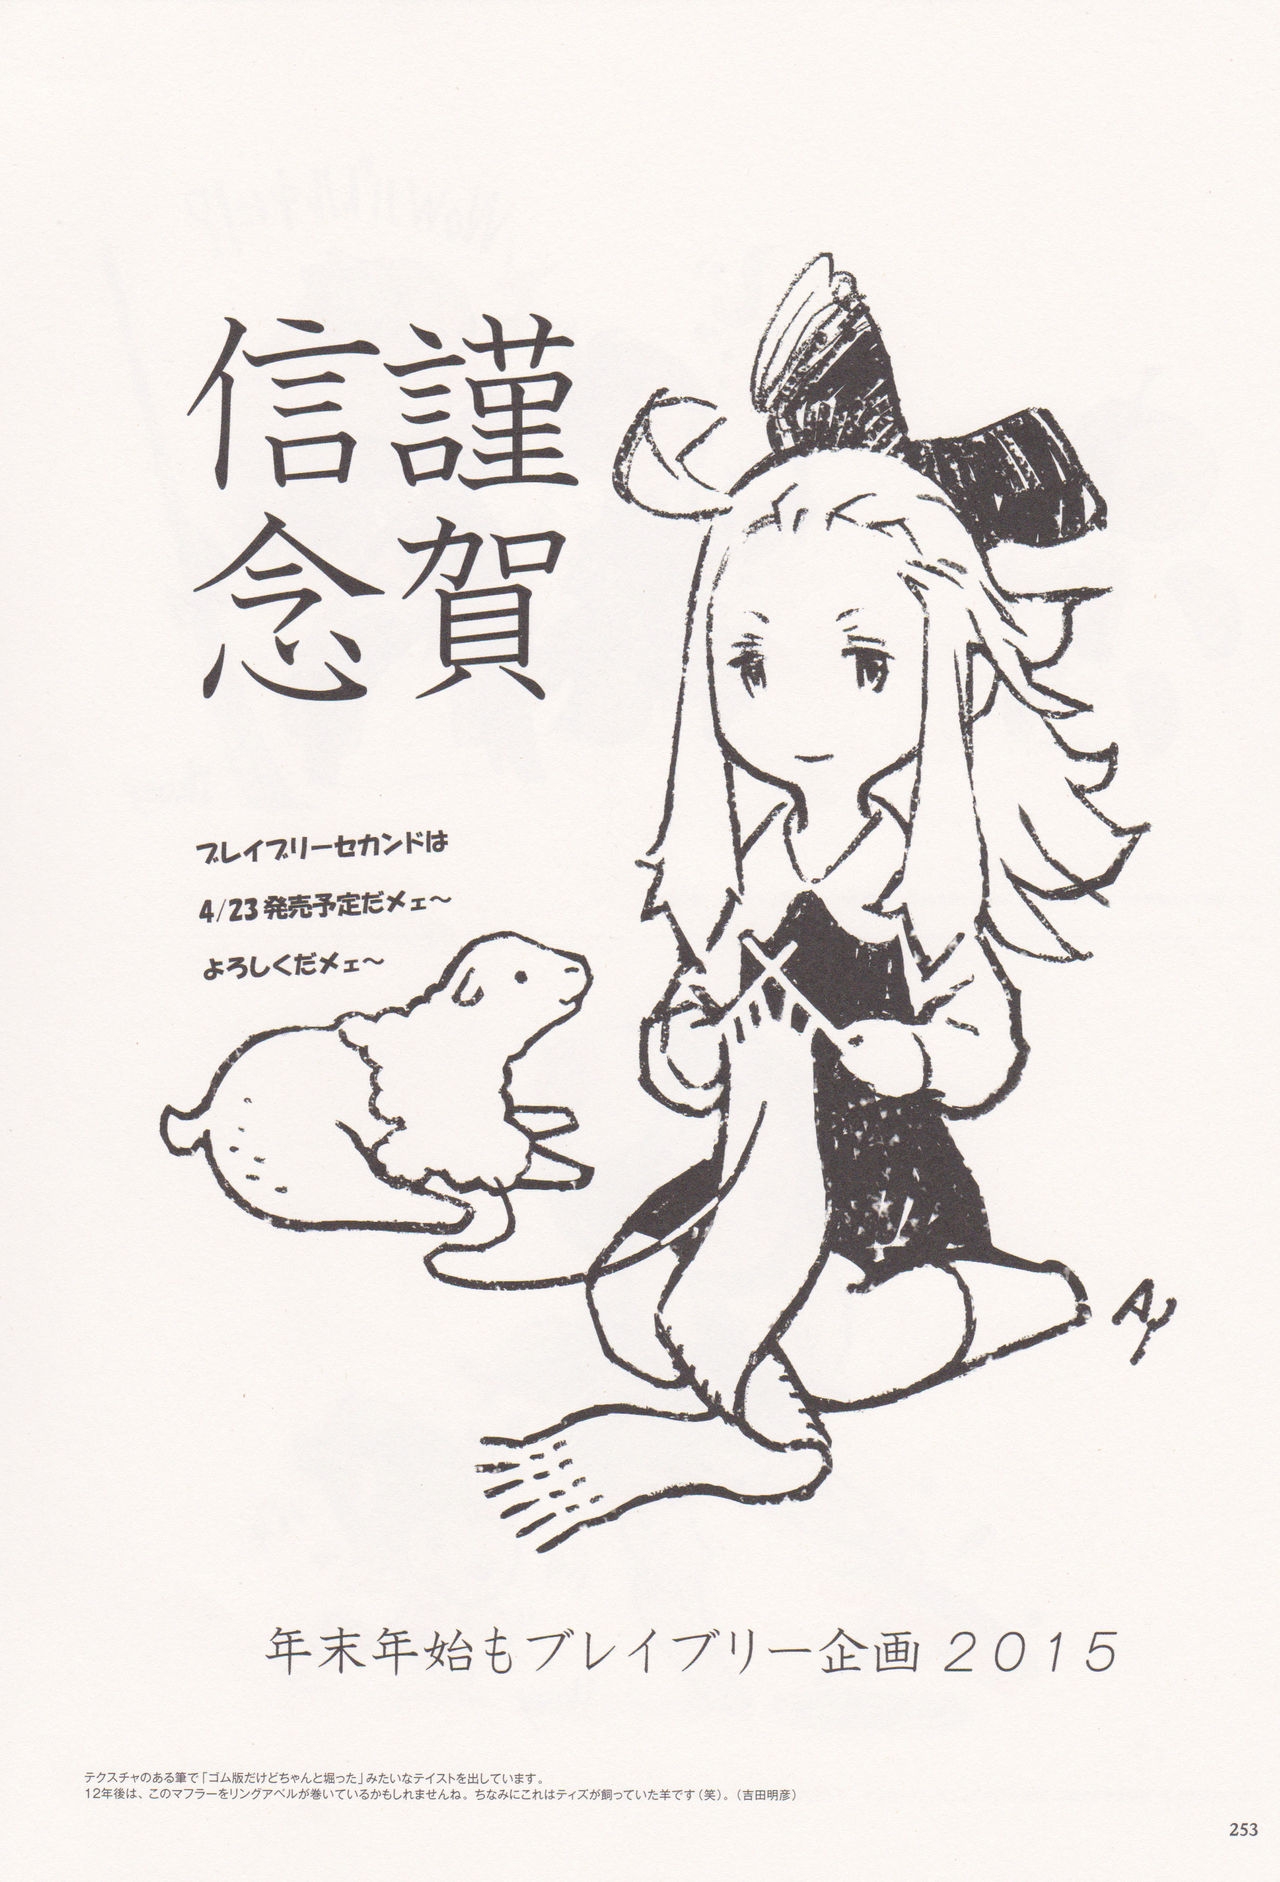 Bravely Second - End Layer - Design Works THE ART OF BRAVELY 2013-2015 252